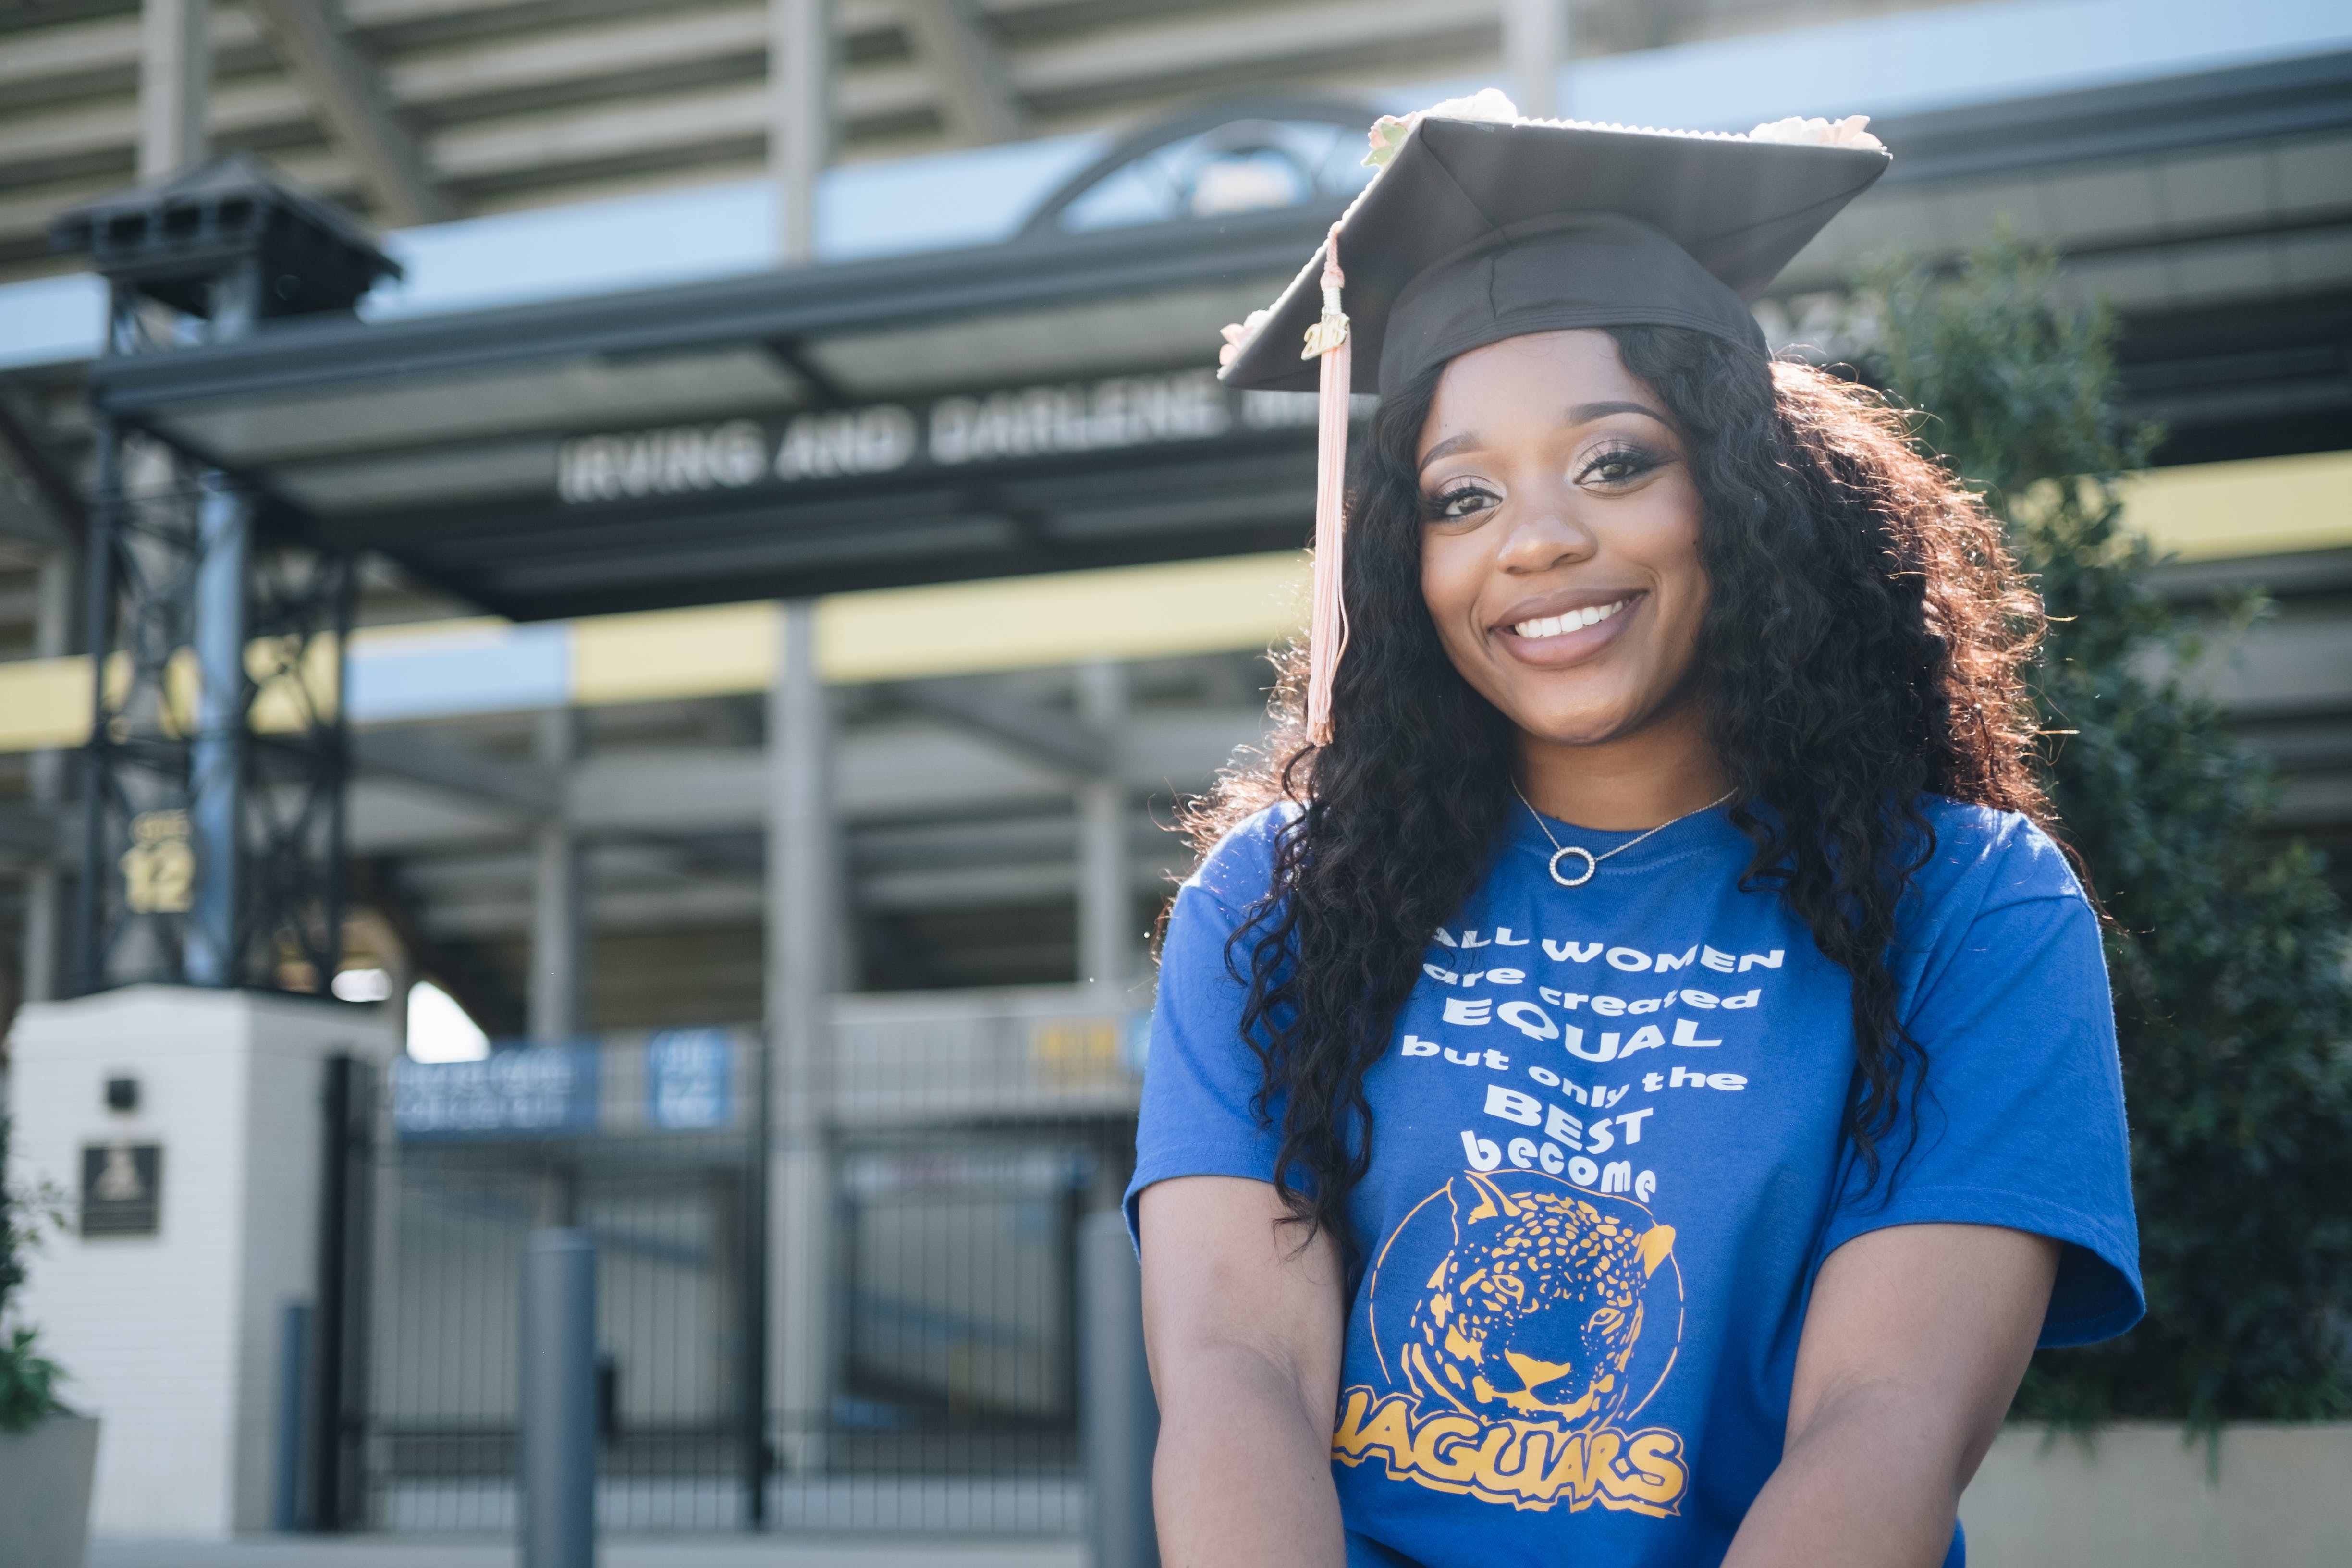 A lady is wearing a black graduation cap and a blue tee with writings